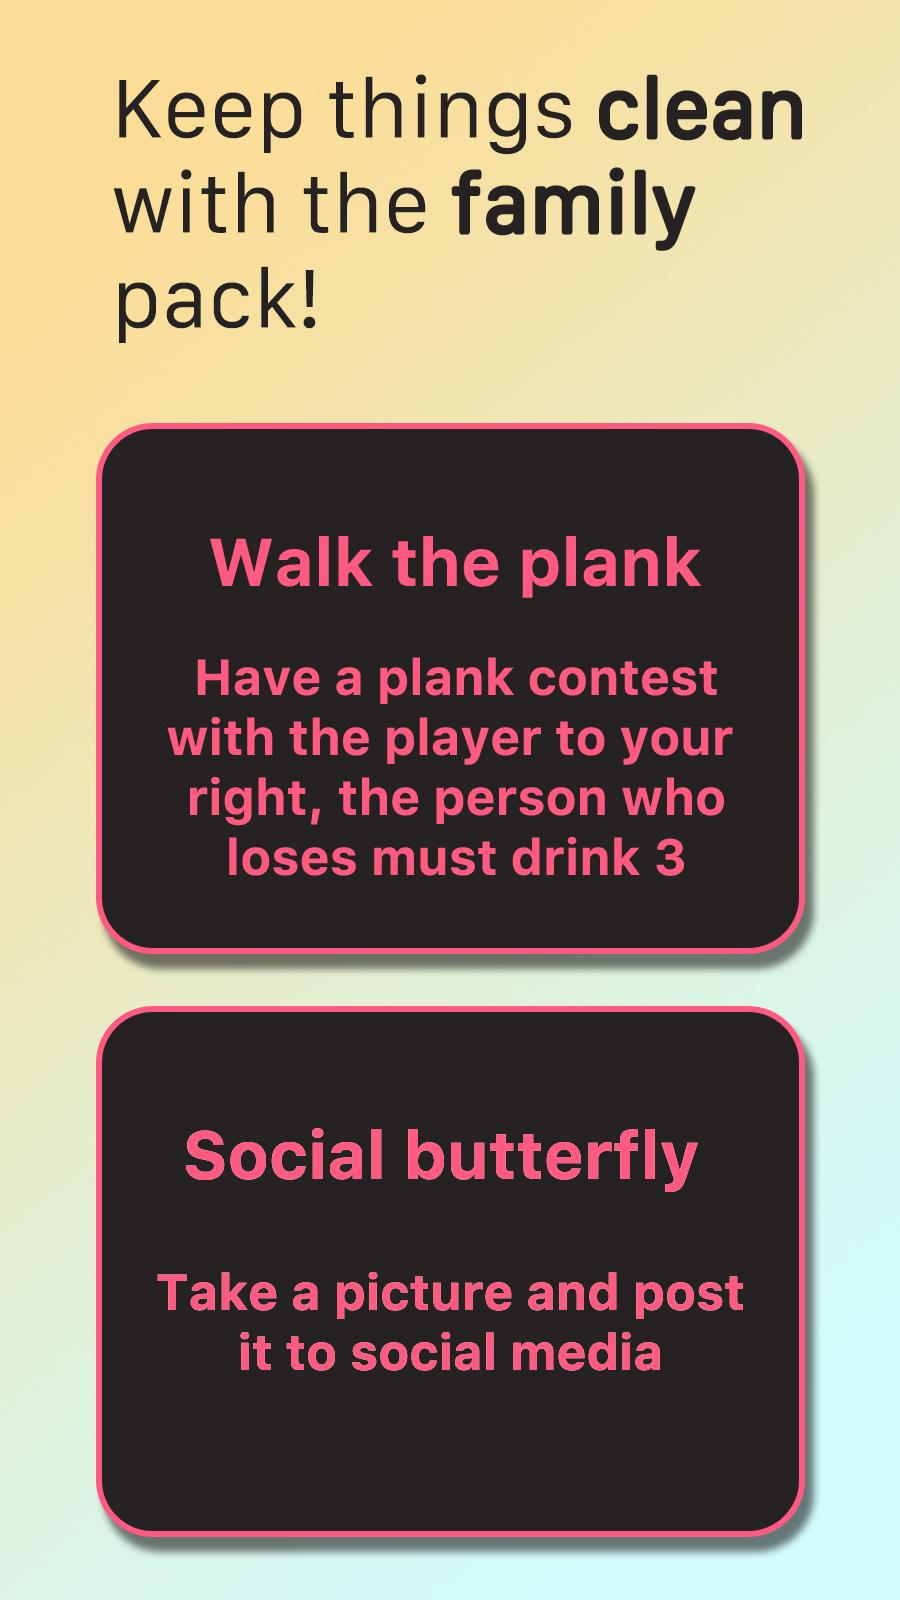 Game Night - The Party Card Game 1.1.45 Screenshot 5